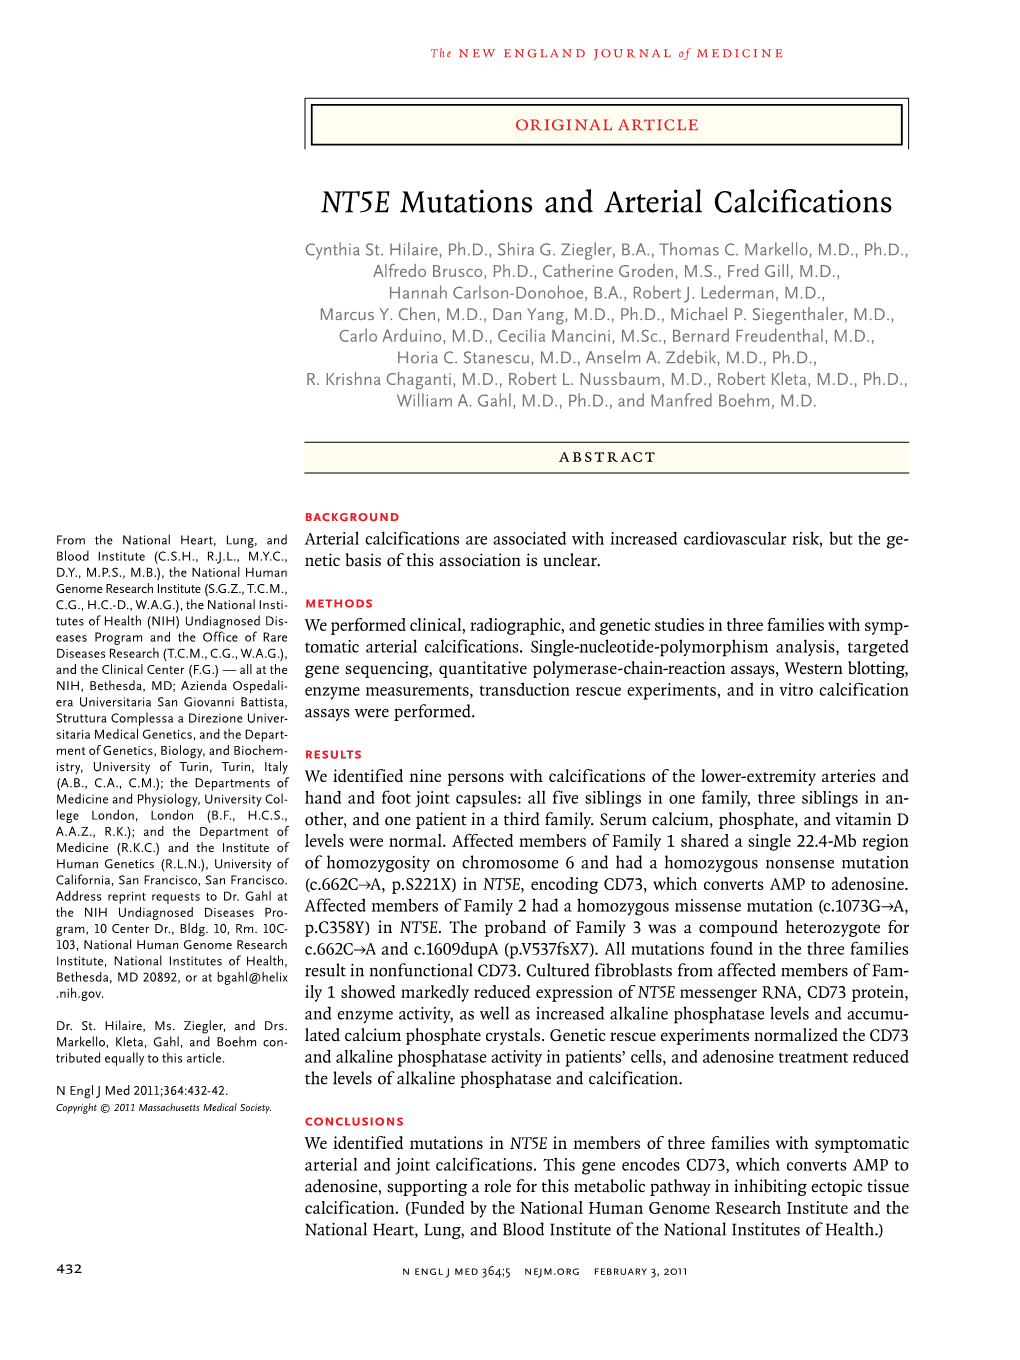 NT5E Mutations and Arterial Calcifications